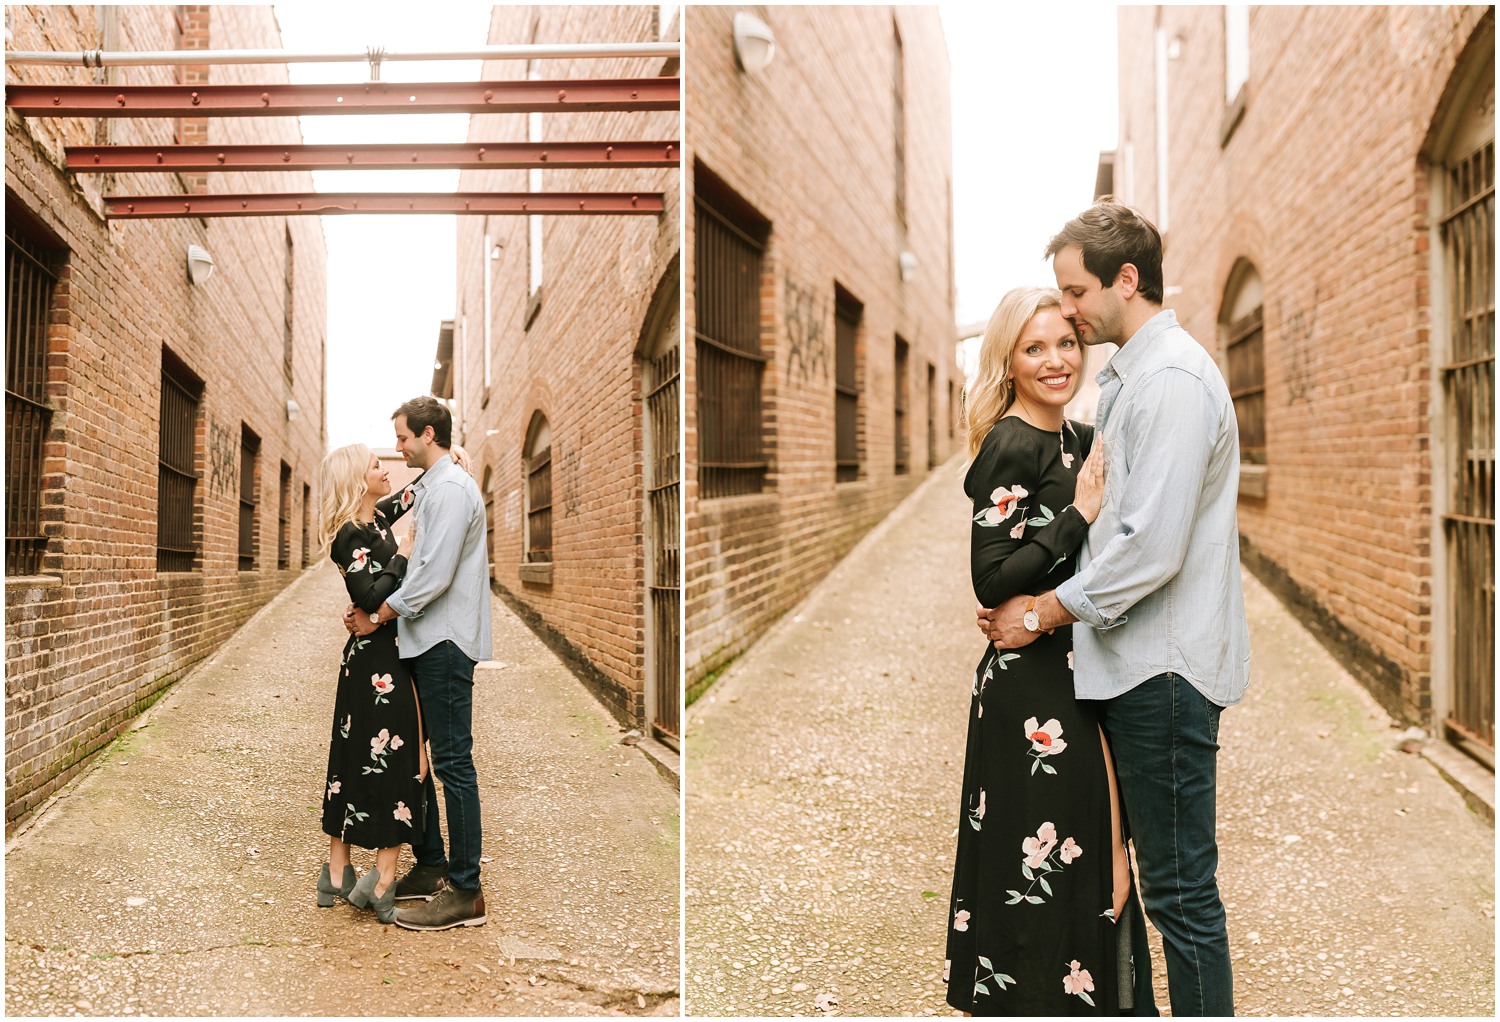 couple poses in brick alleyway in Raleigh NC during engagement session